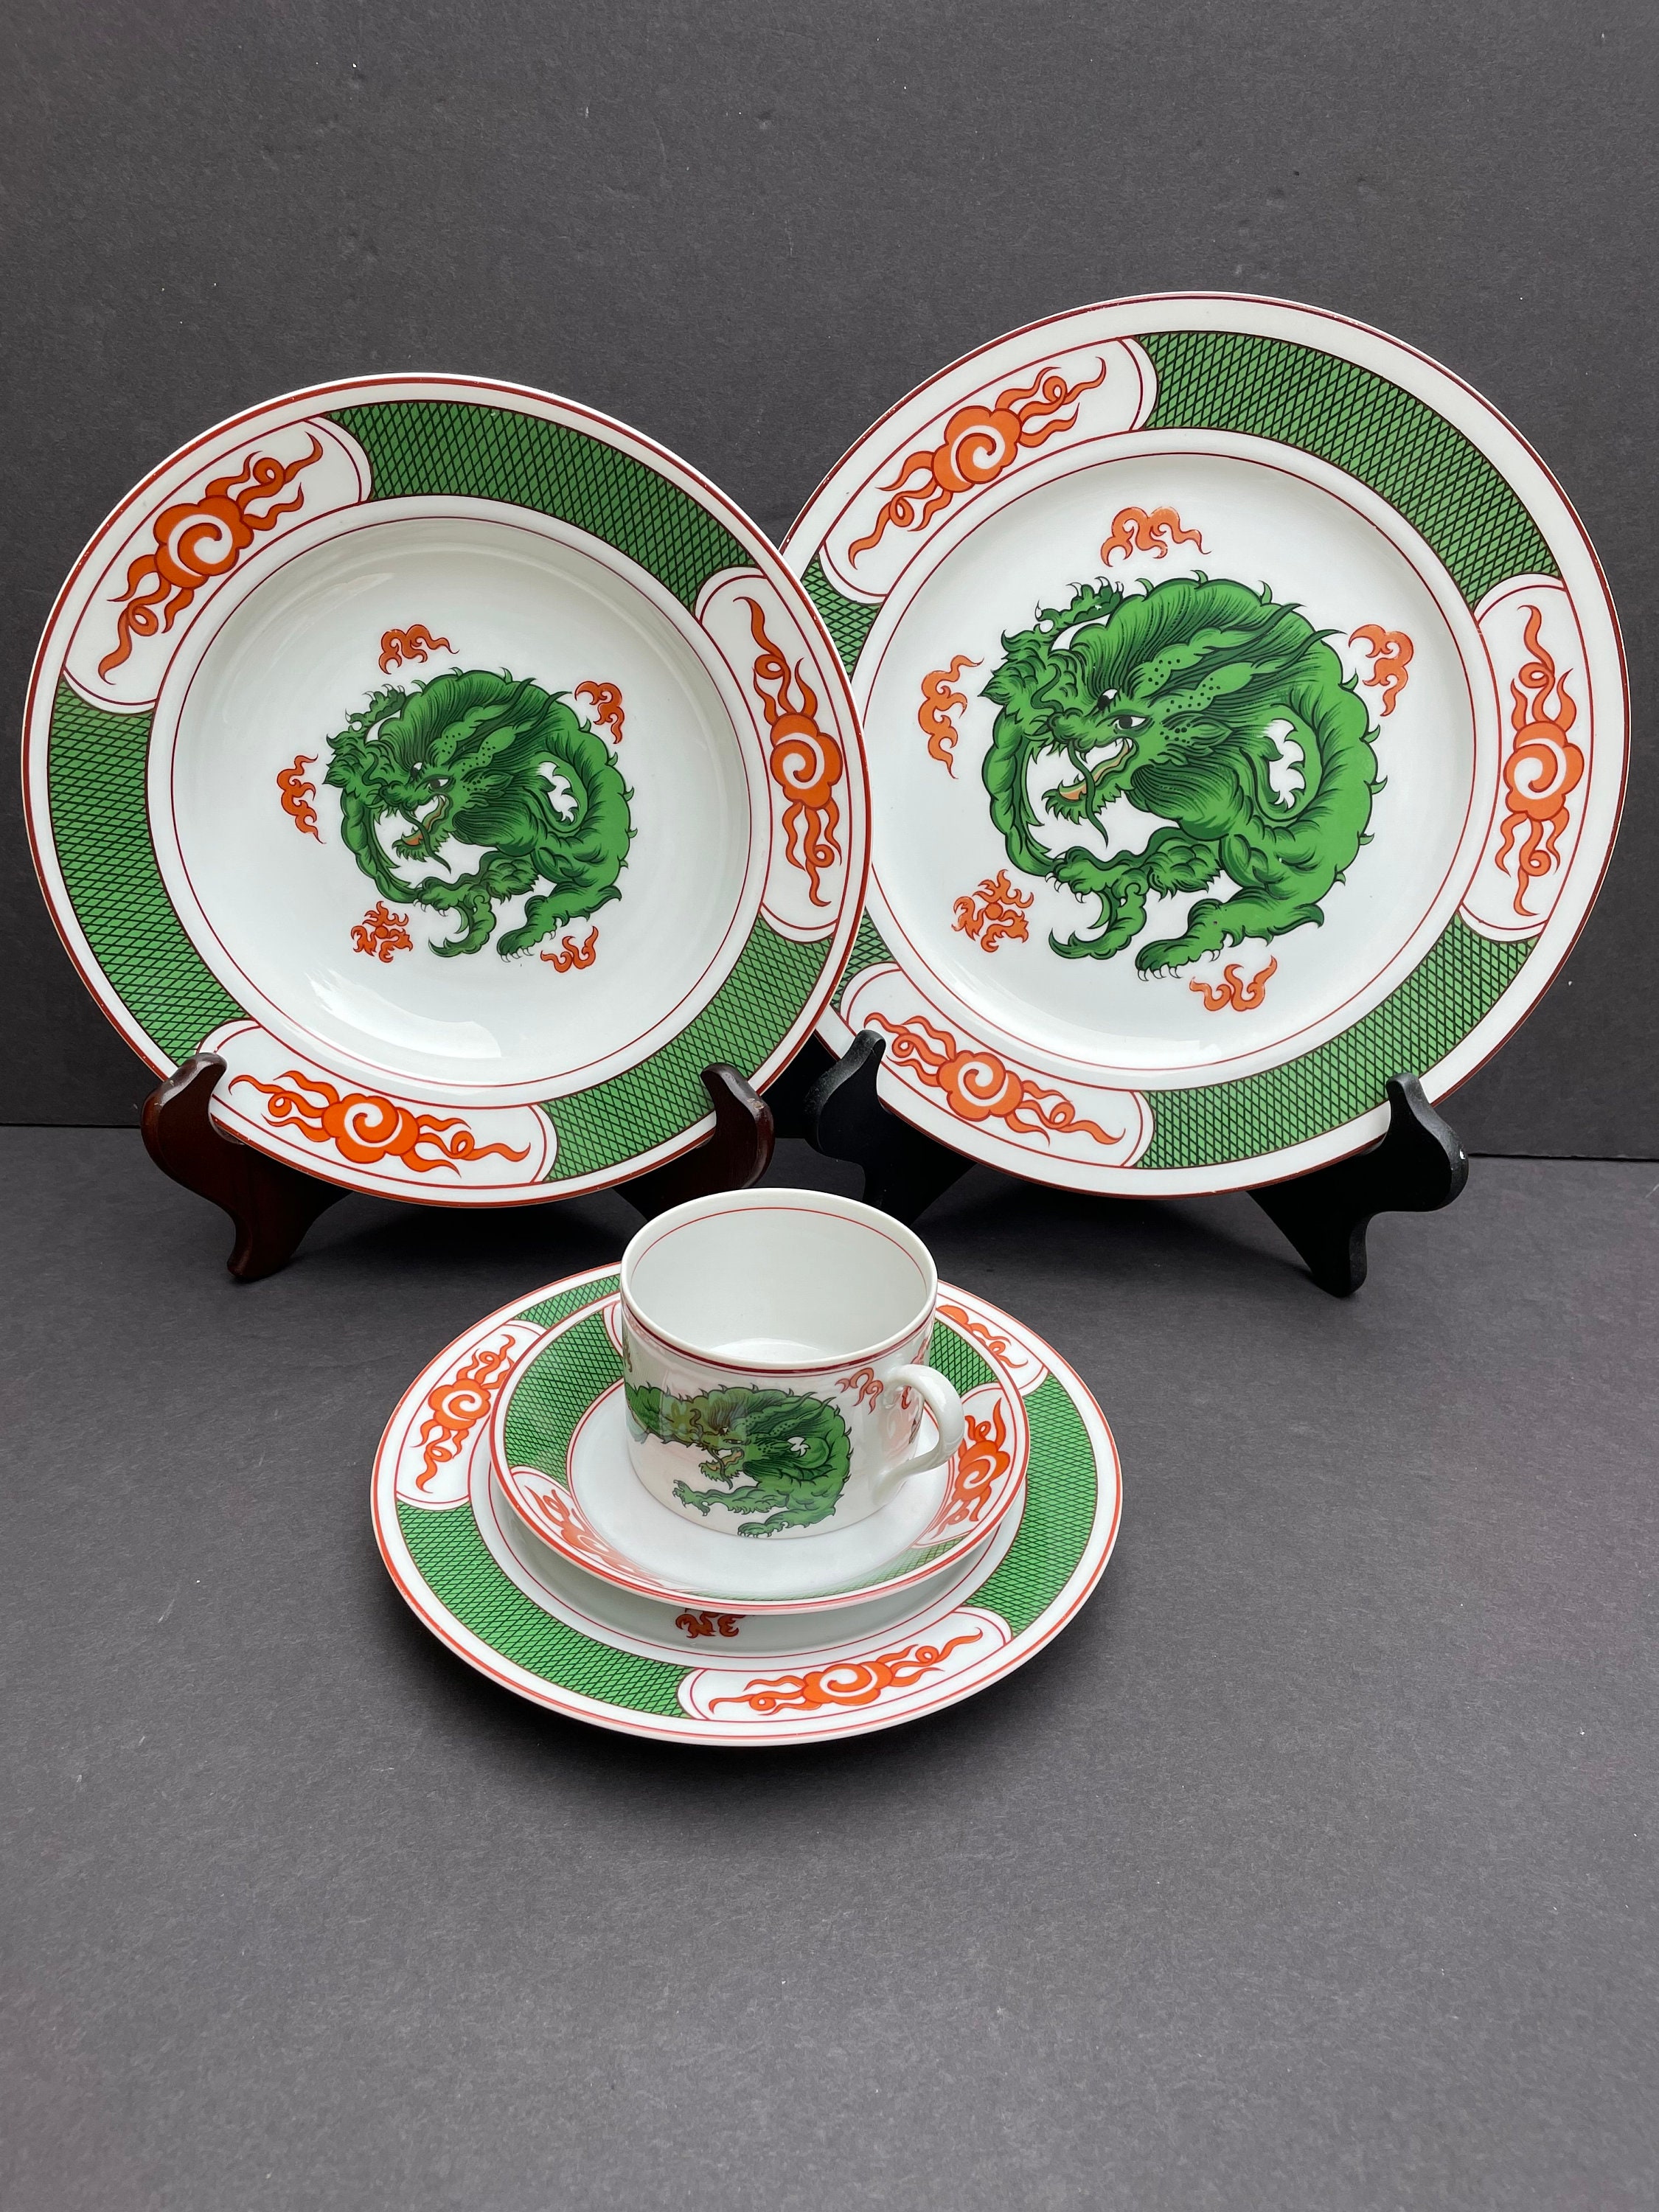 Fitz and Floyd Green Dragon Crest 5 Piece Place Setting Dinnerware | Dinner  Plate | Salad Plate | Soup Bowl | Cup and saucer | Unique